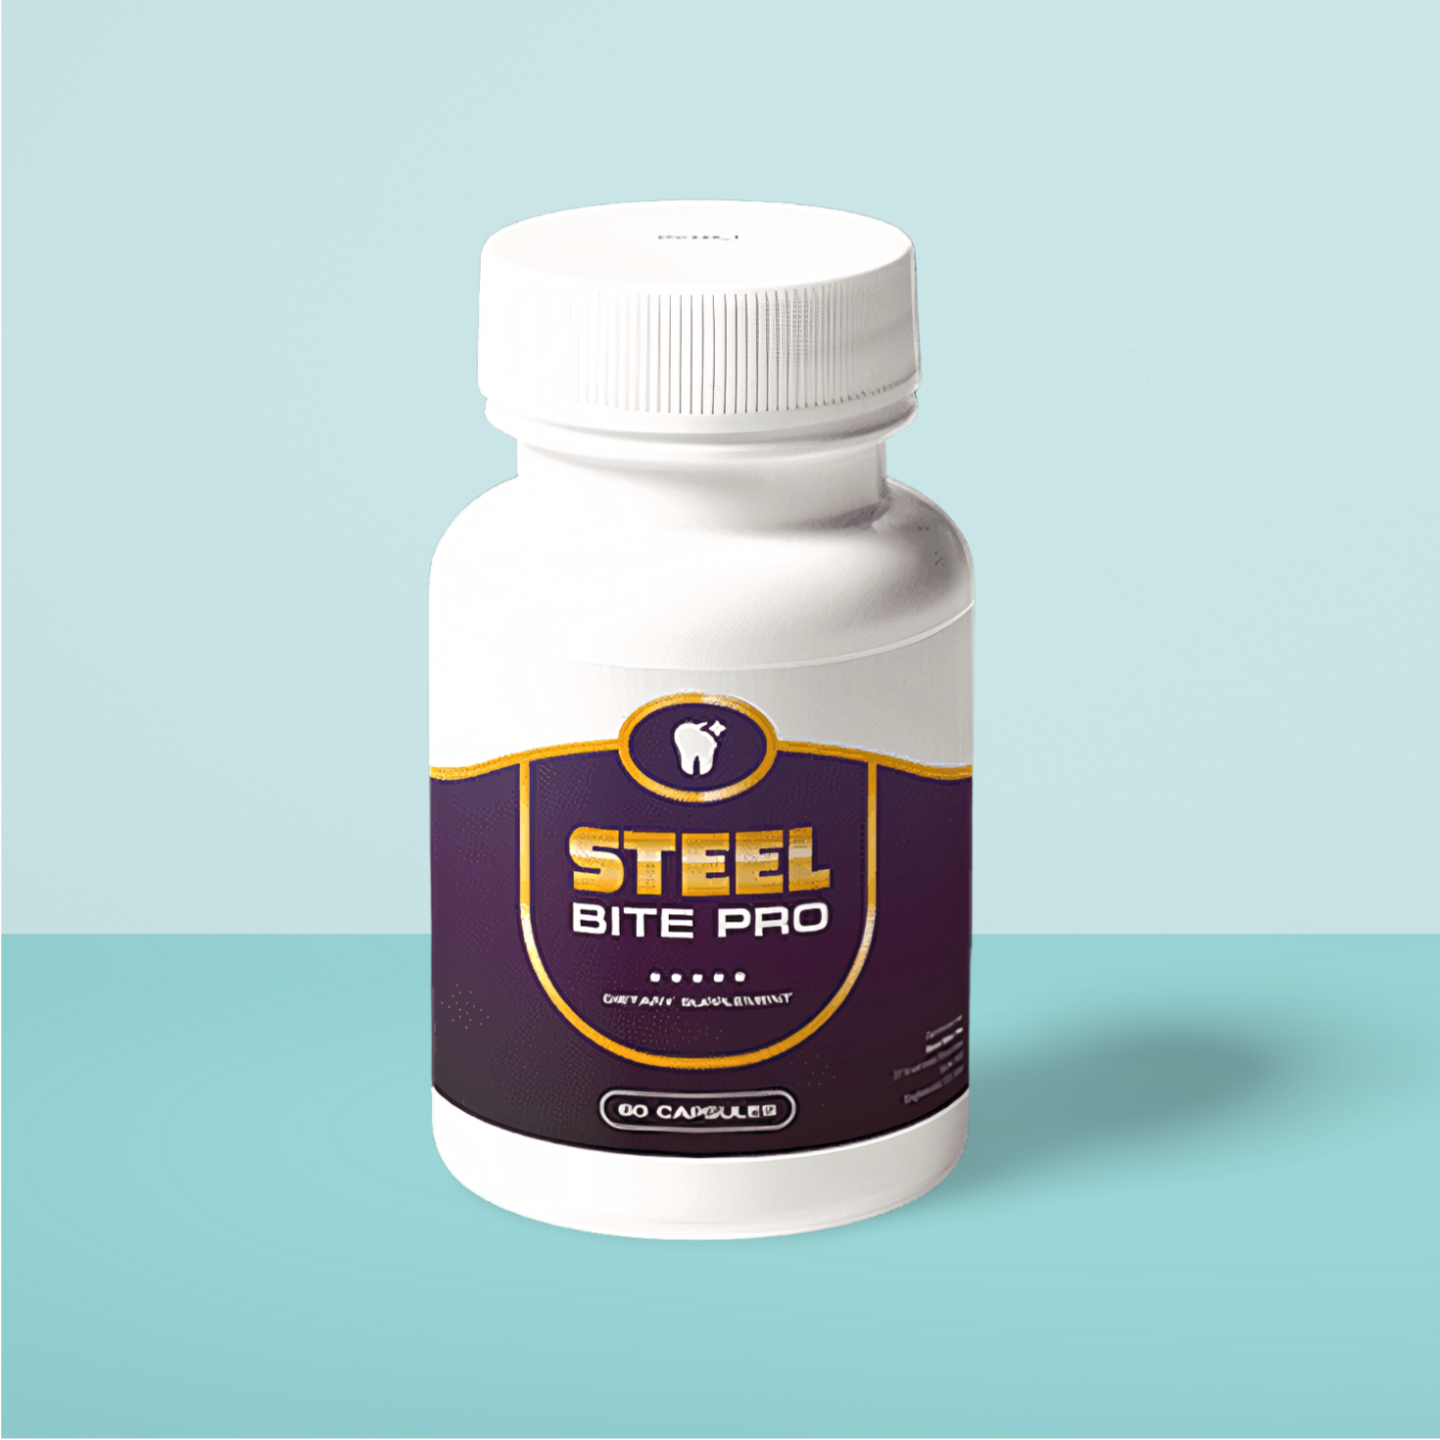 Steel Bite Pro Reviews – A Reliable Oral Health Solution? Exposing the Reality of This Dental Care Supplemen